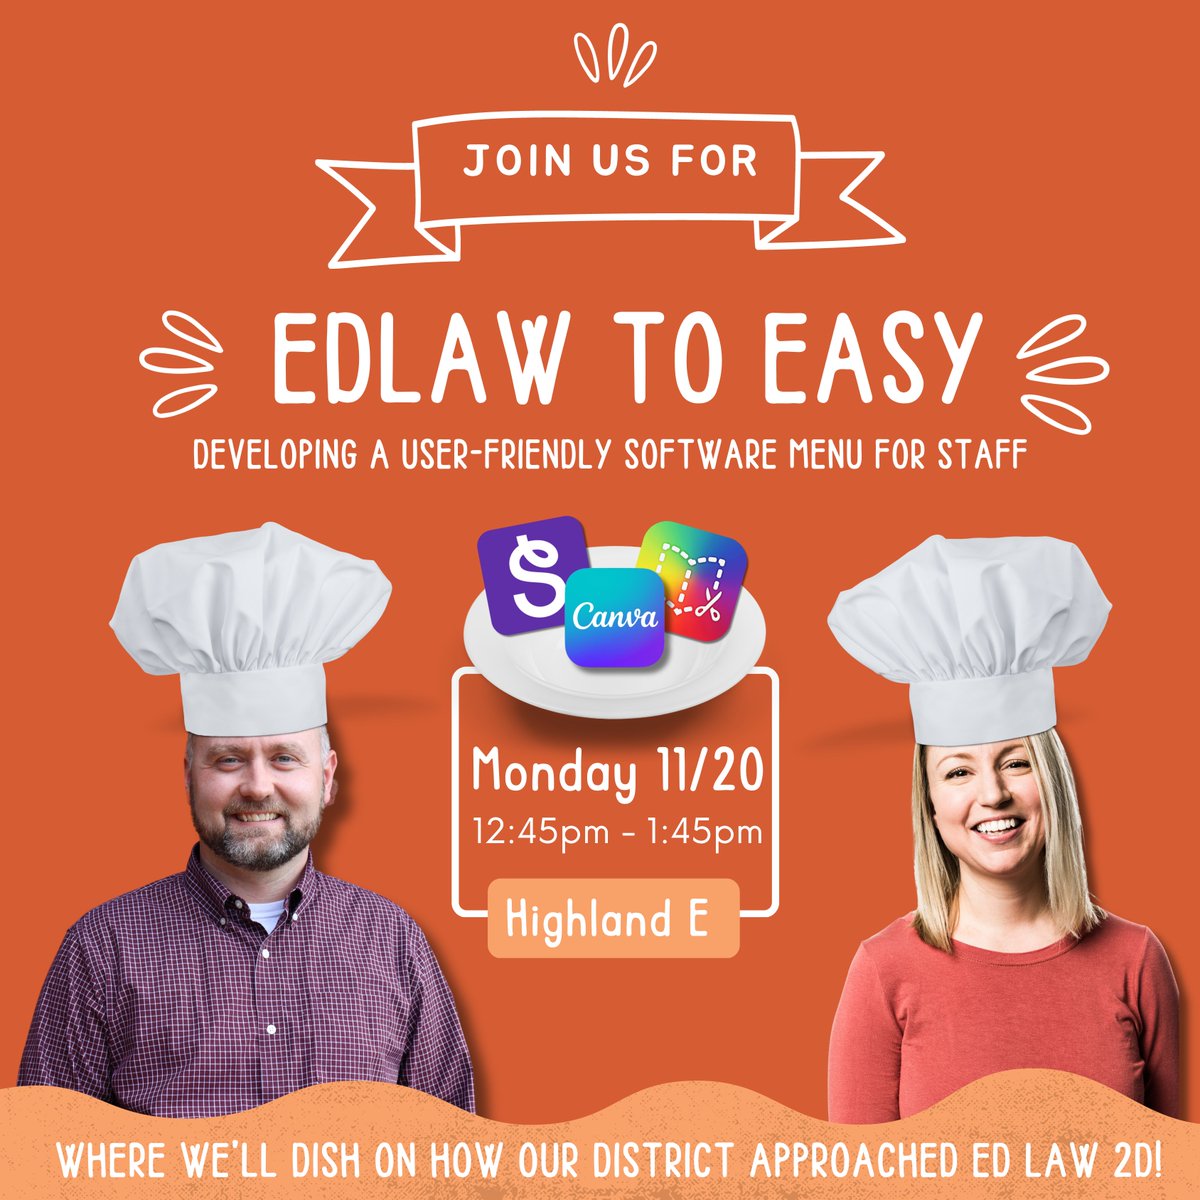 Join me and @EdTechMcMillan at @NYSCATE this year as we dish on how our district created a user friendly Ed Law 2D software menu for our staff! #NYSCATE23